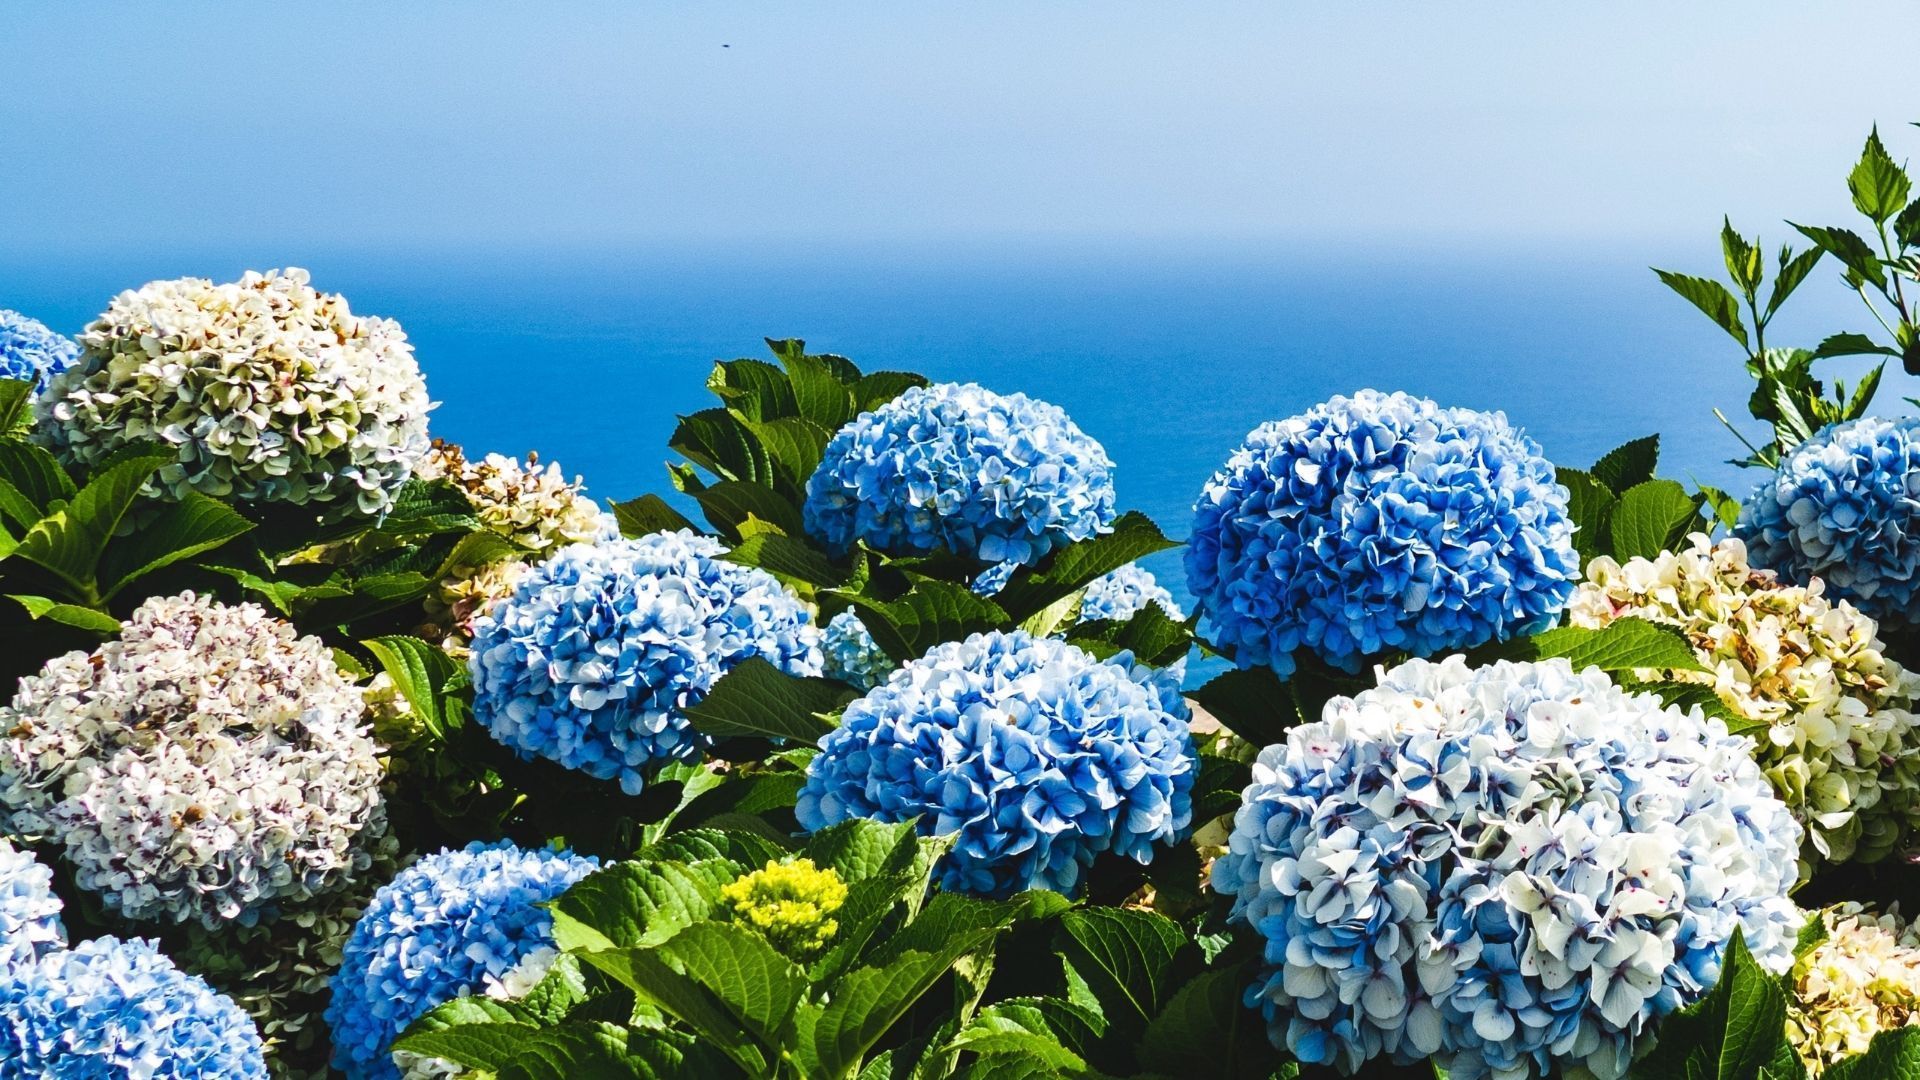 50 of the most gorgeous flowers in the world and what they symbolise